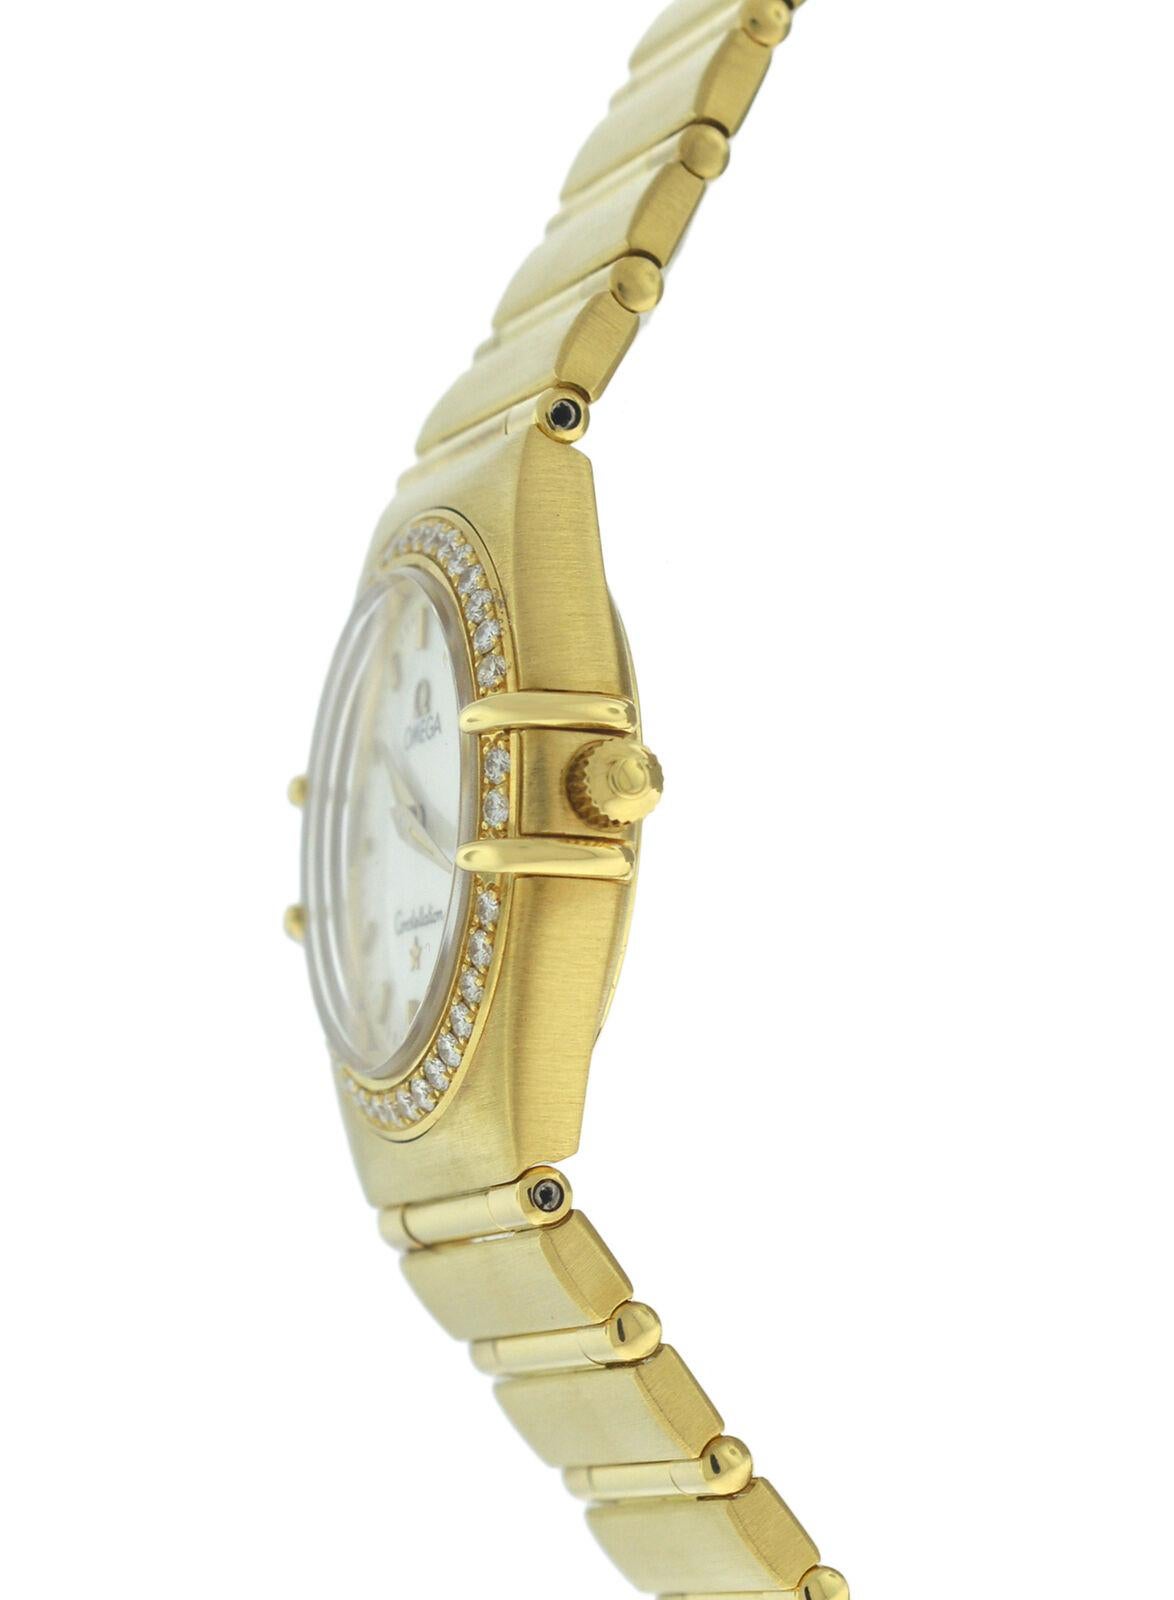 Ladies Omega Constellation 18 Karat Gold Mother of Pearl Diamond Quartz Watch In Excellent Condition For Sale In New York, NY